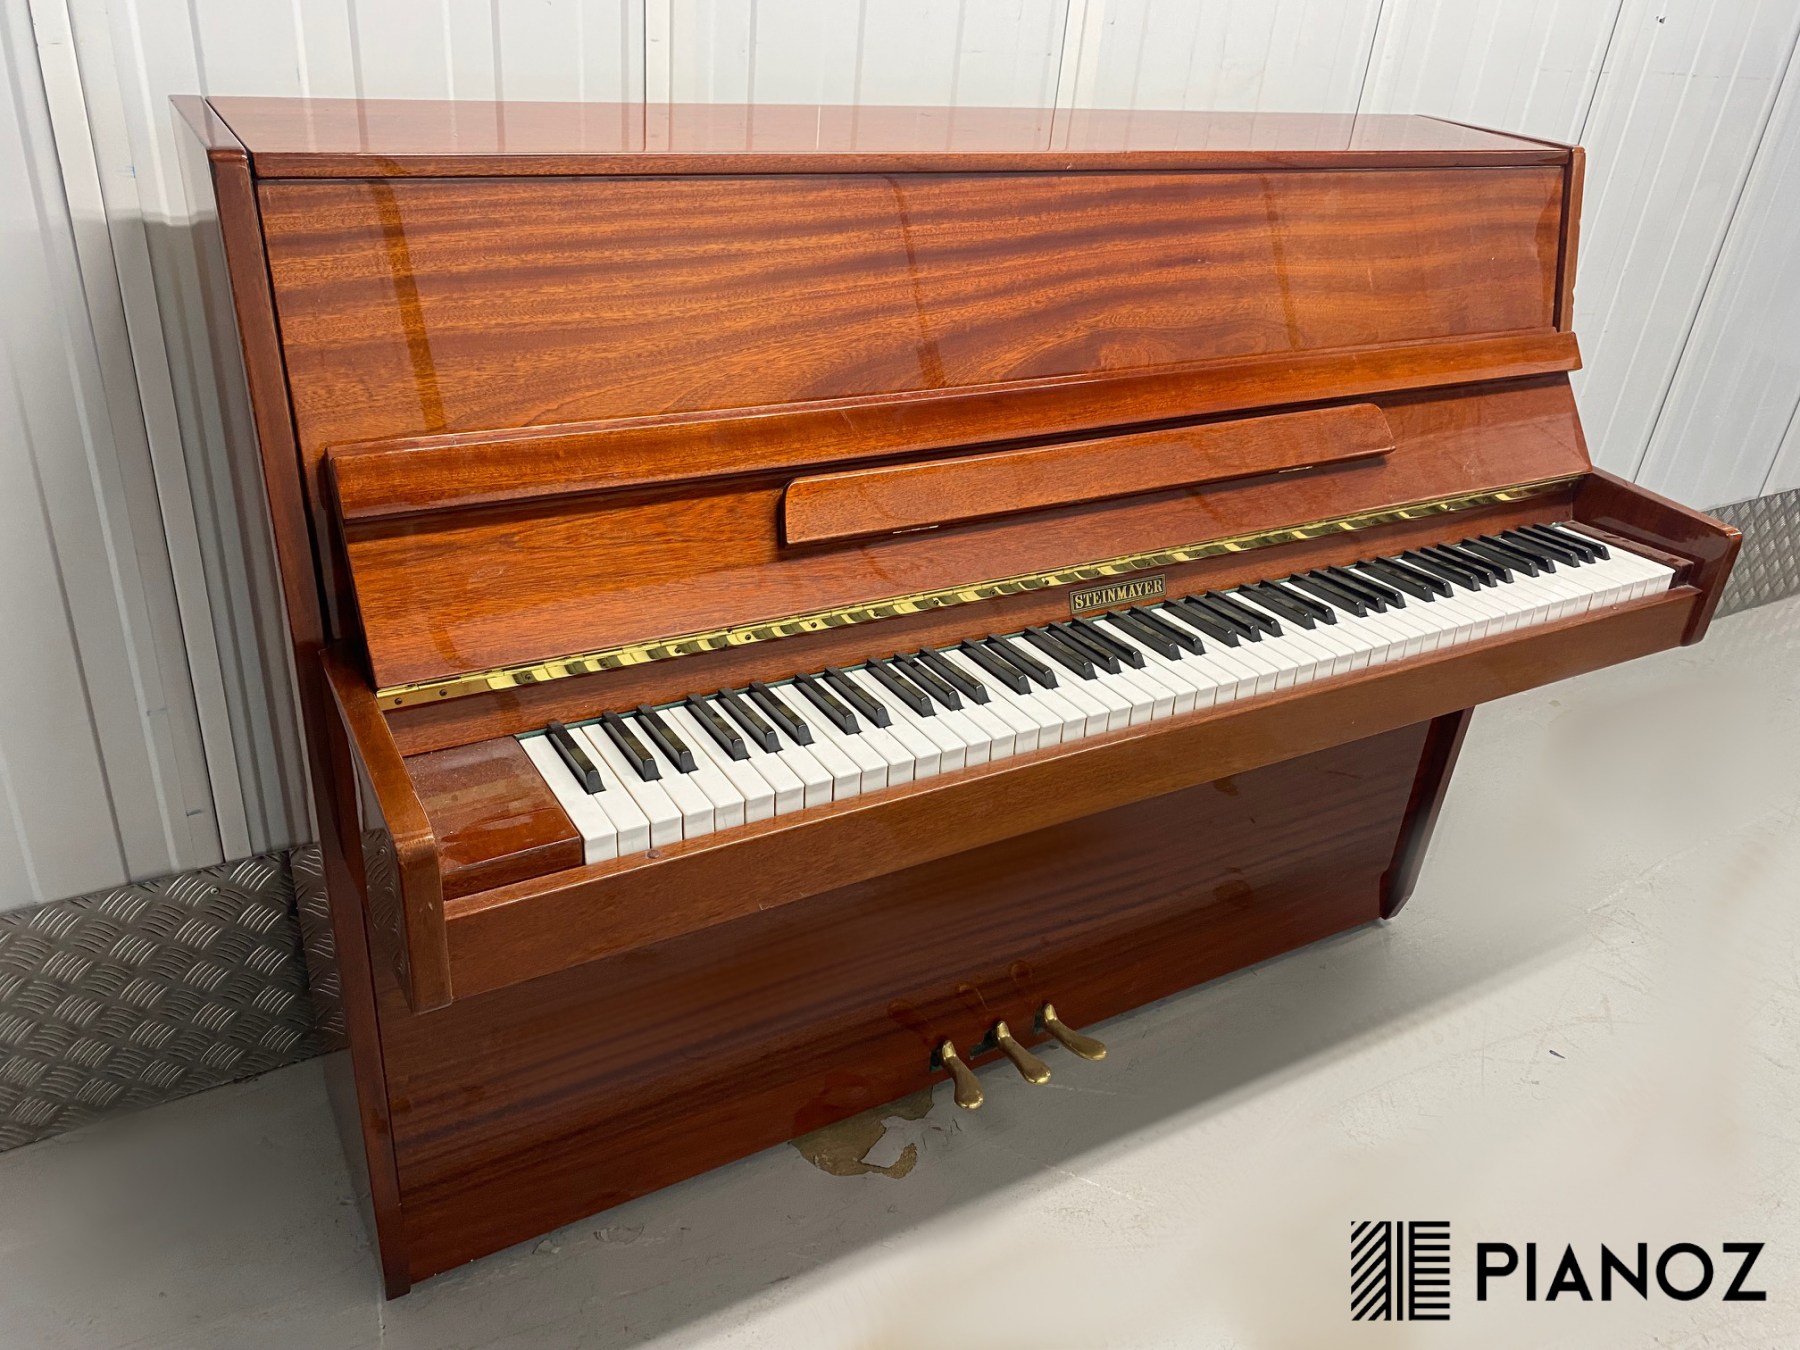 Steinmayer 108 Upright Piano piano for sale in UK